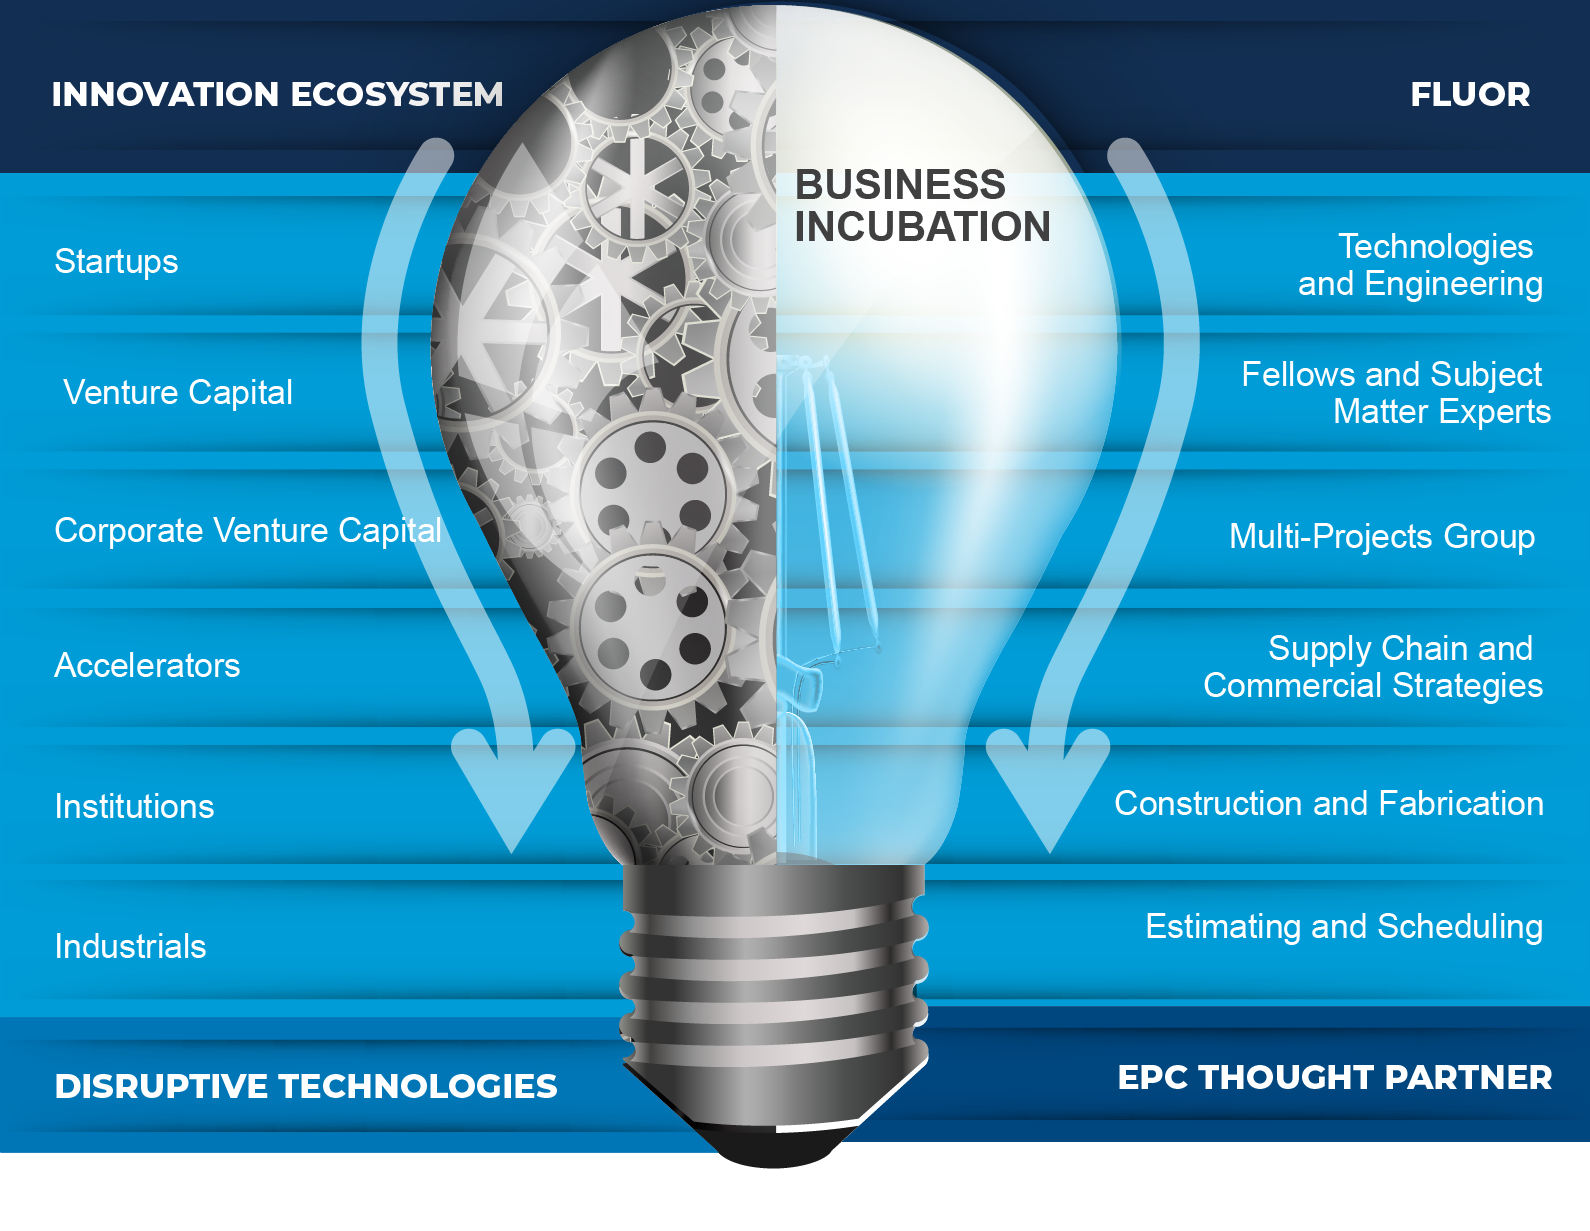 Graphic illustrating how Fluor draws from areas of expertise as an EPC thought partner to benefit the disruptive technology innovation ecosystem, converging around an LED lightbulb, half of which is composed of gears, depicting the concept of putting ideas to work collectively.